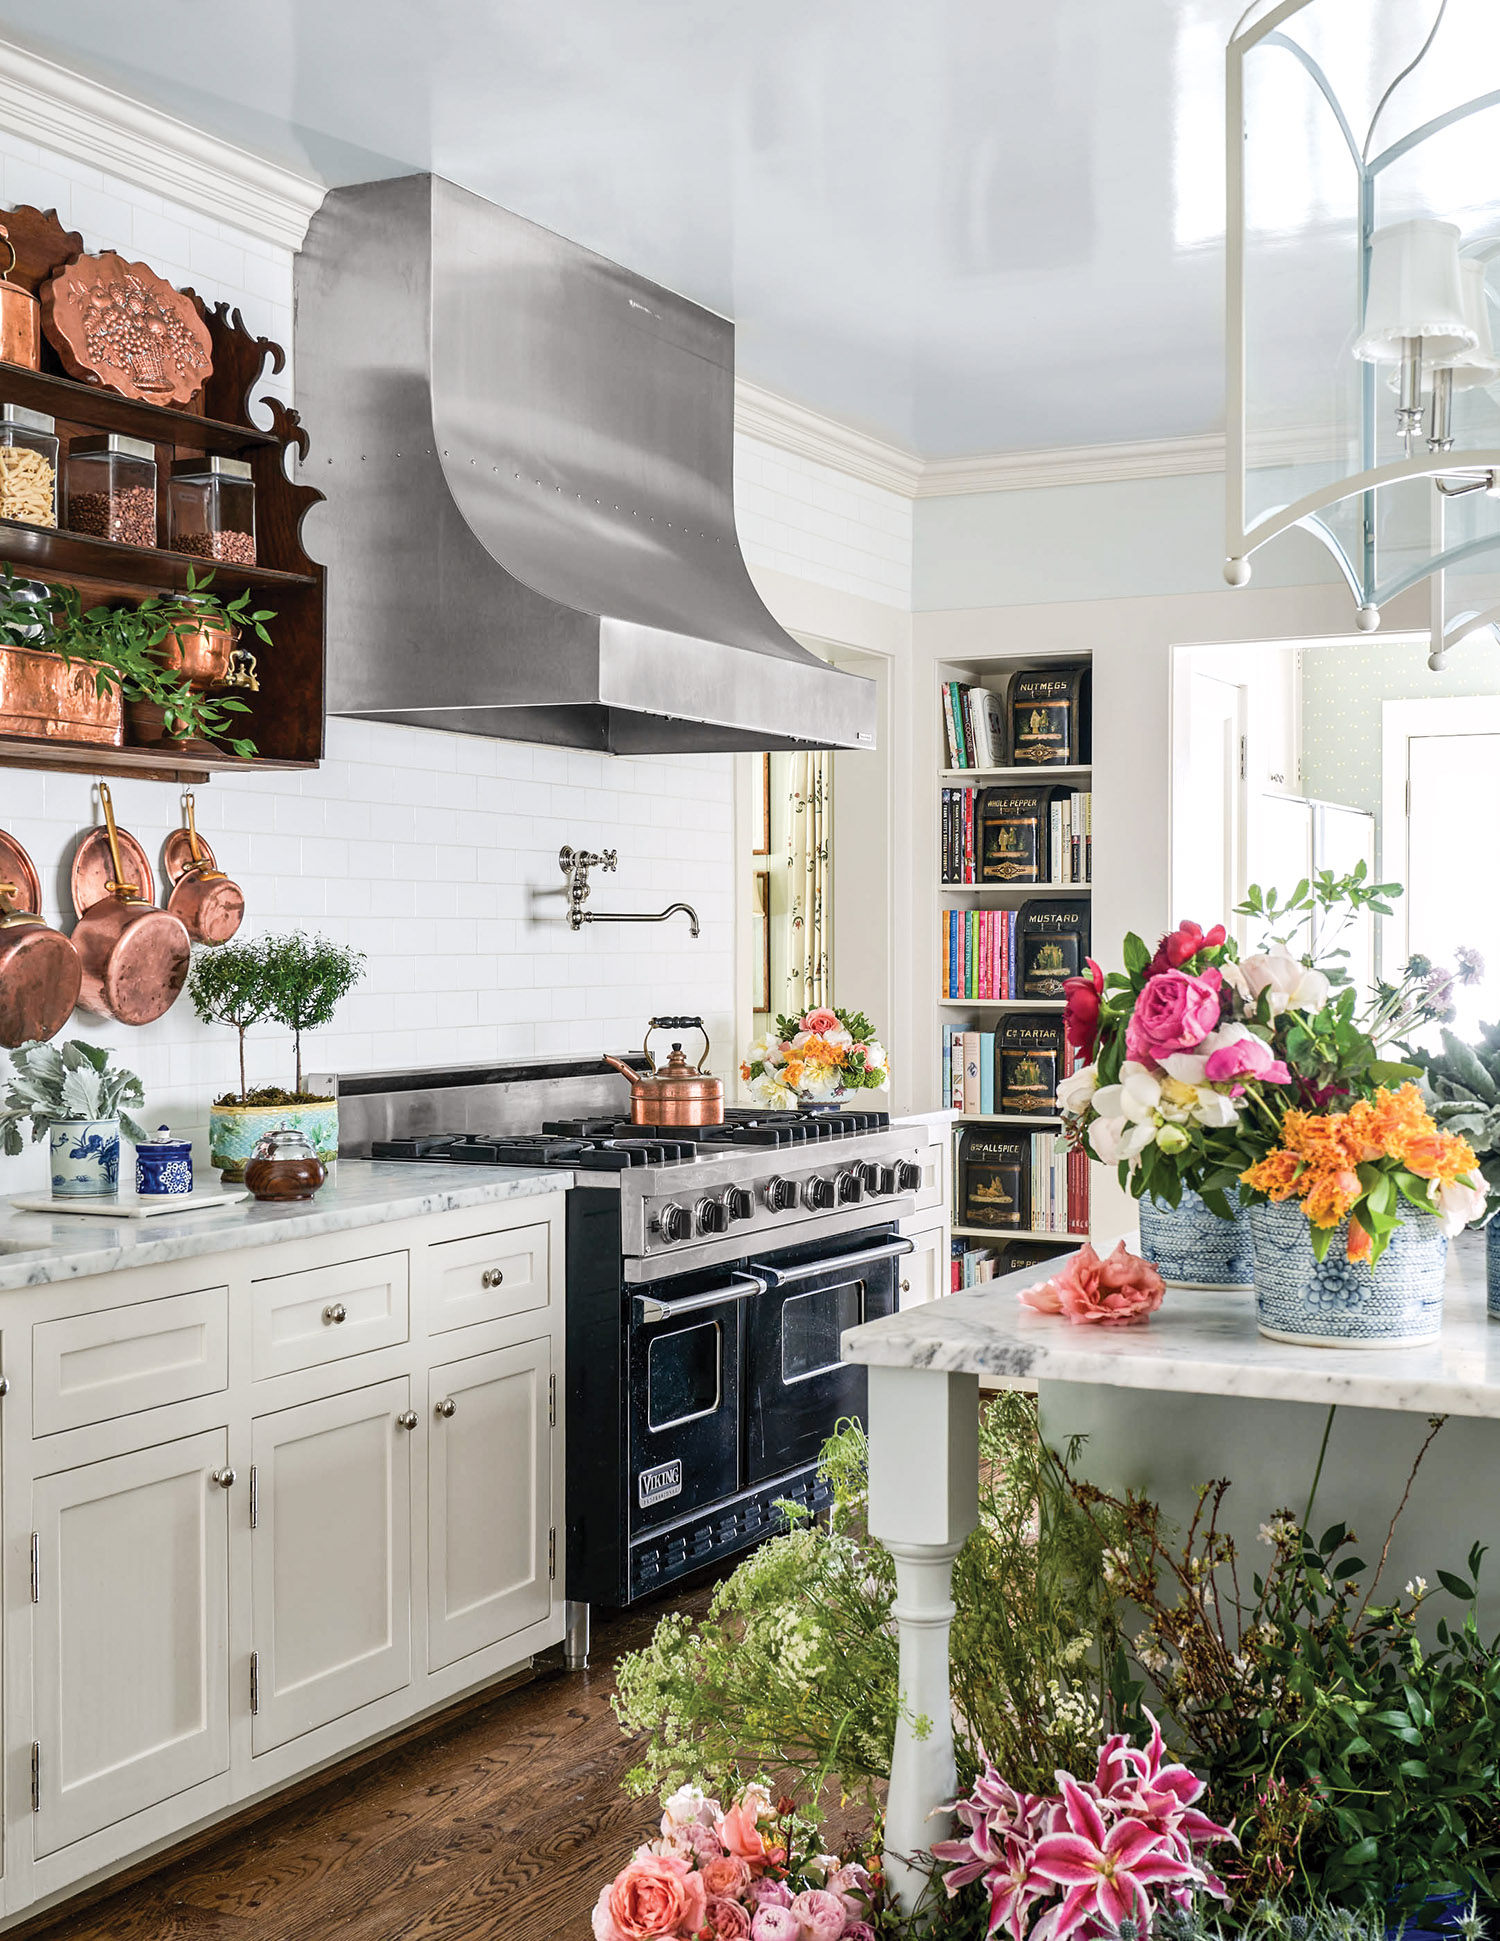 Kitchen filled with flowers